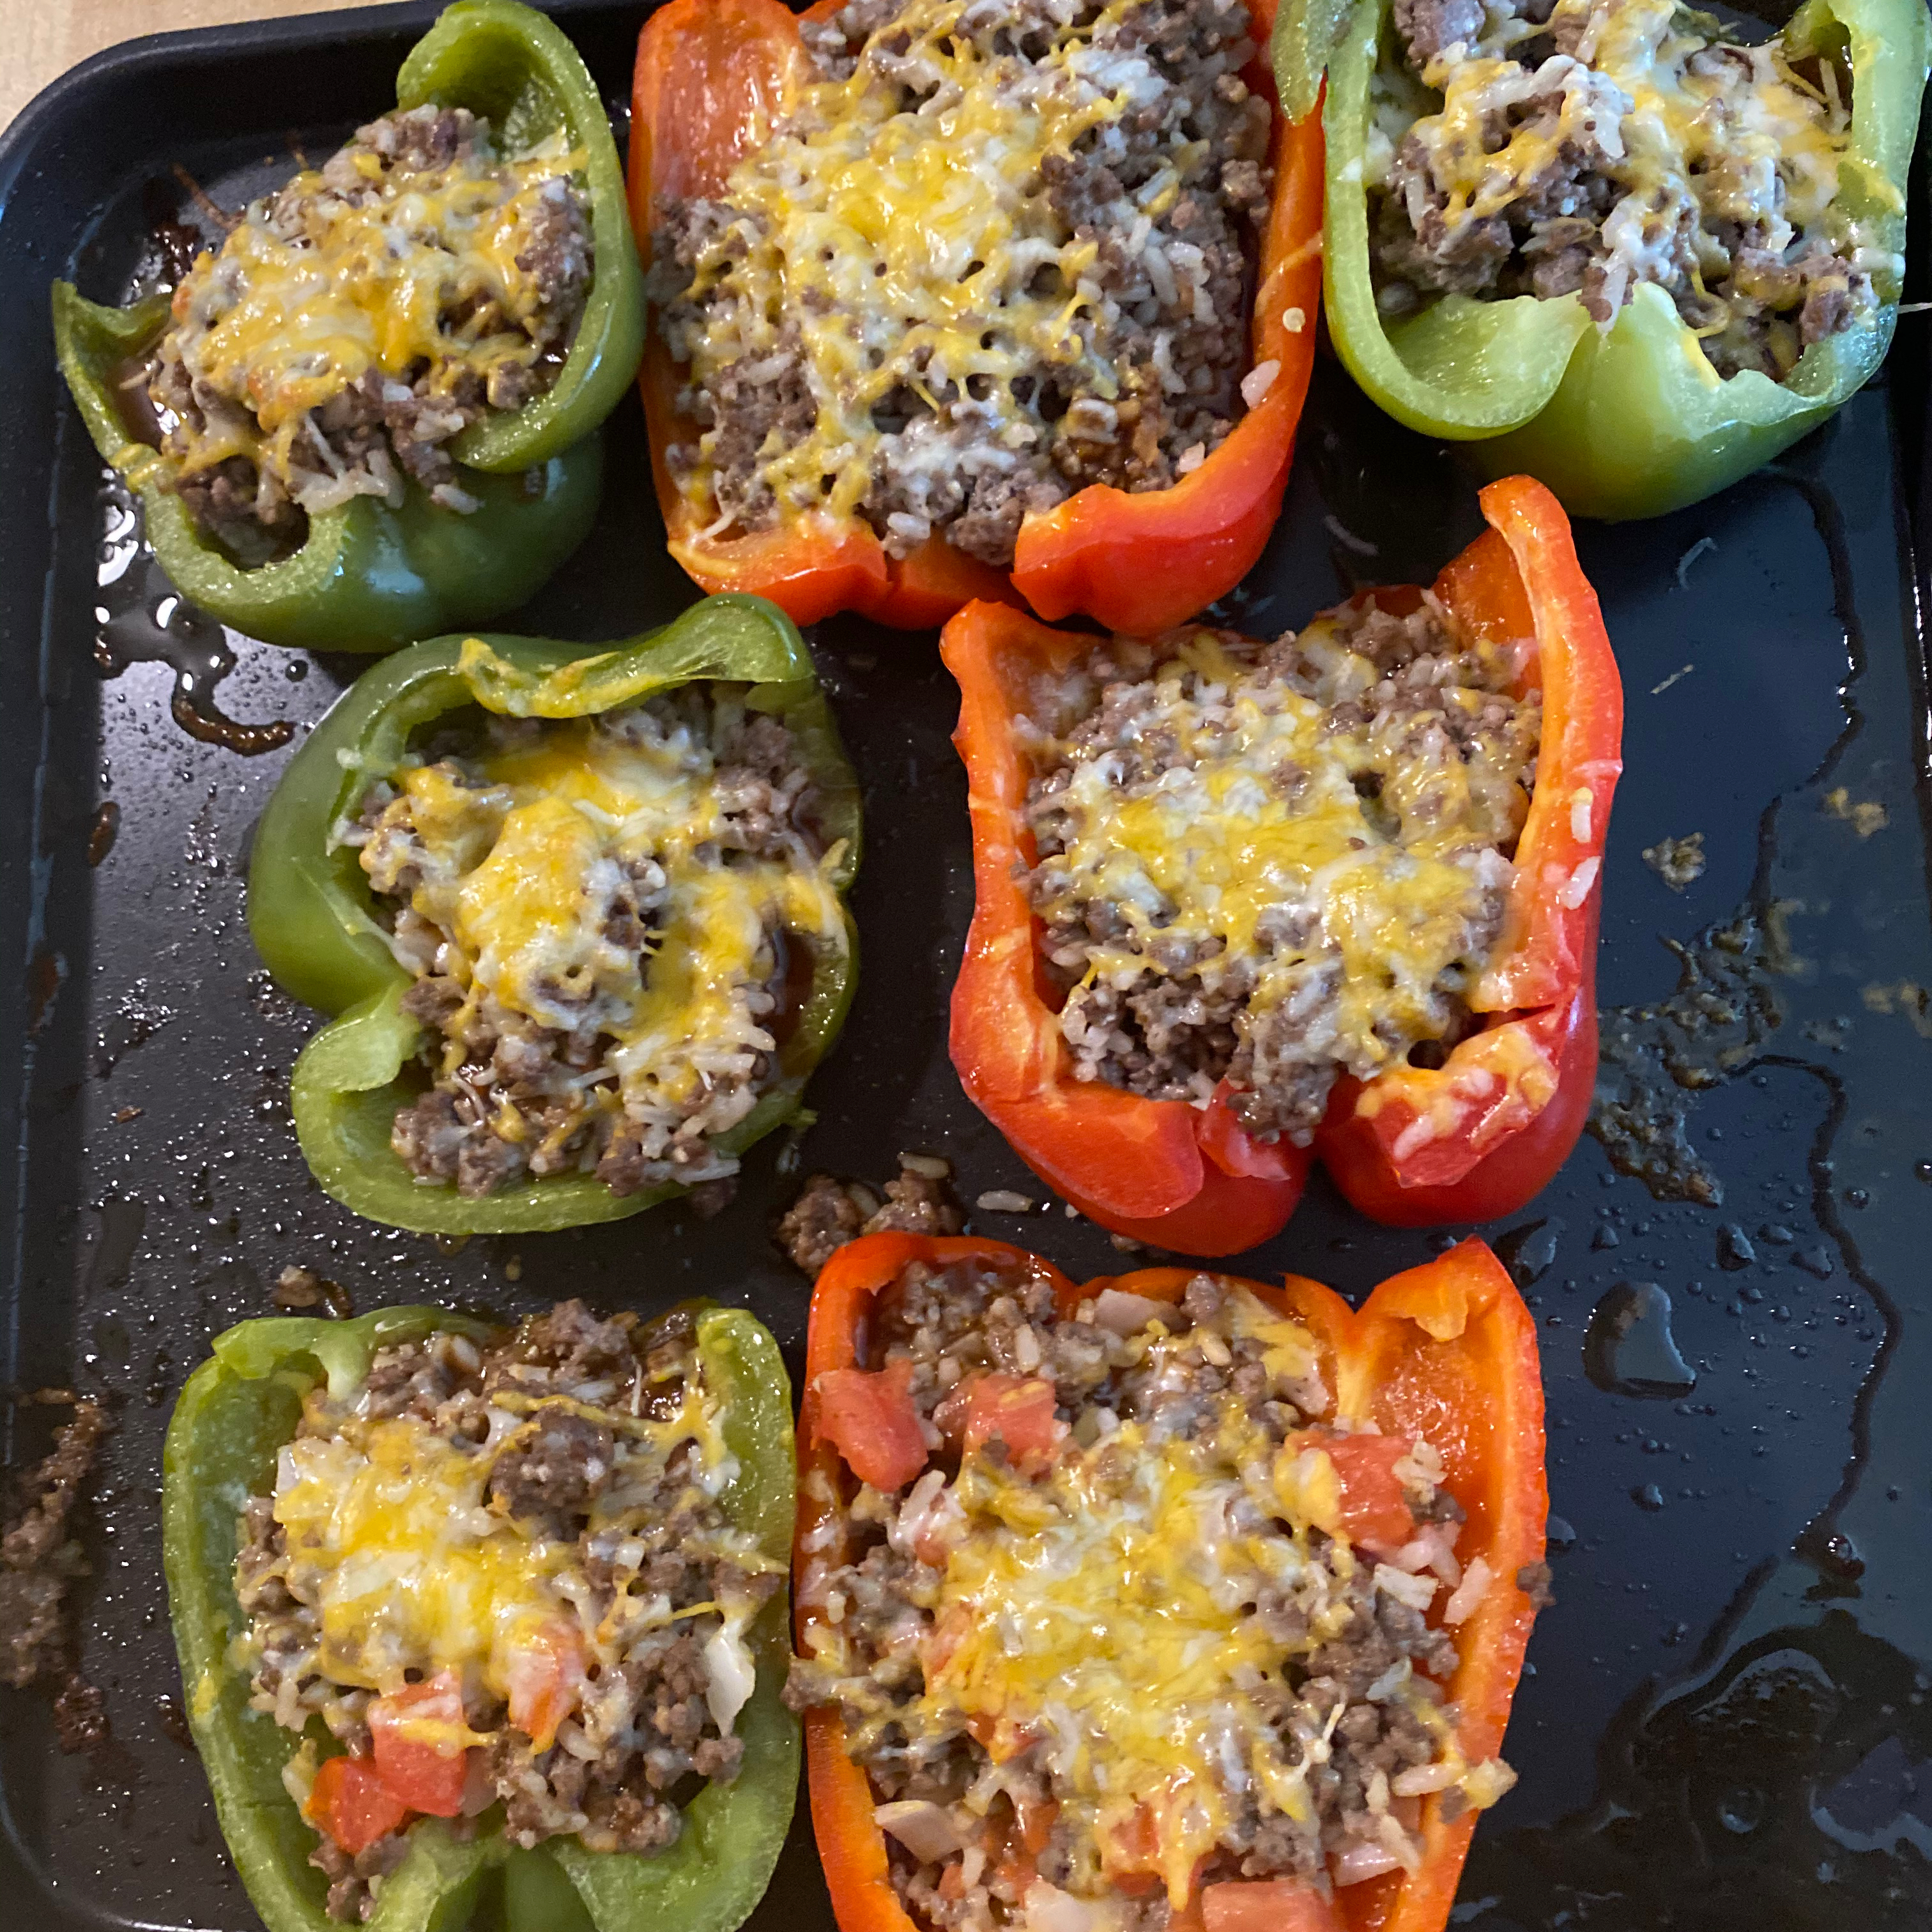 Yummy Stuffed Peppers dslaughter97